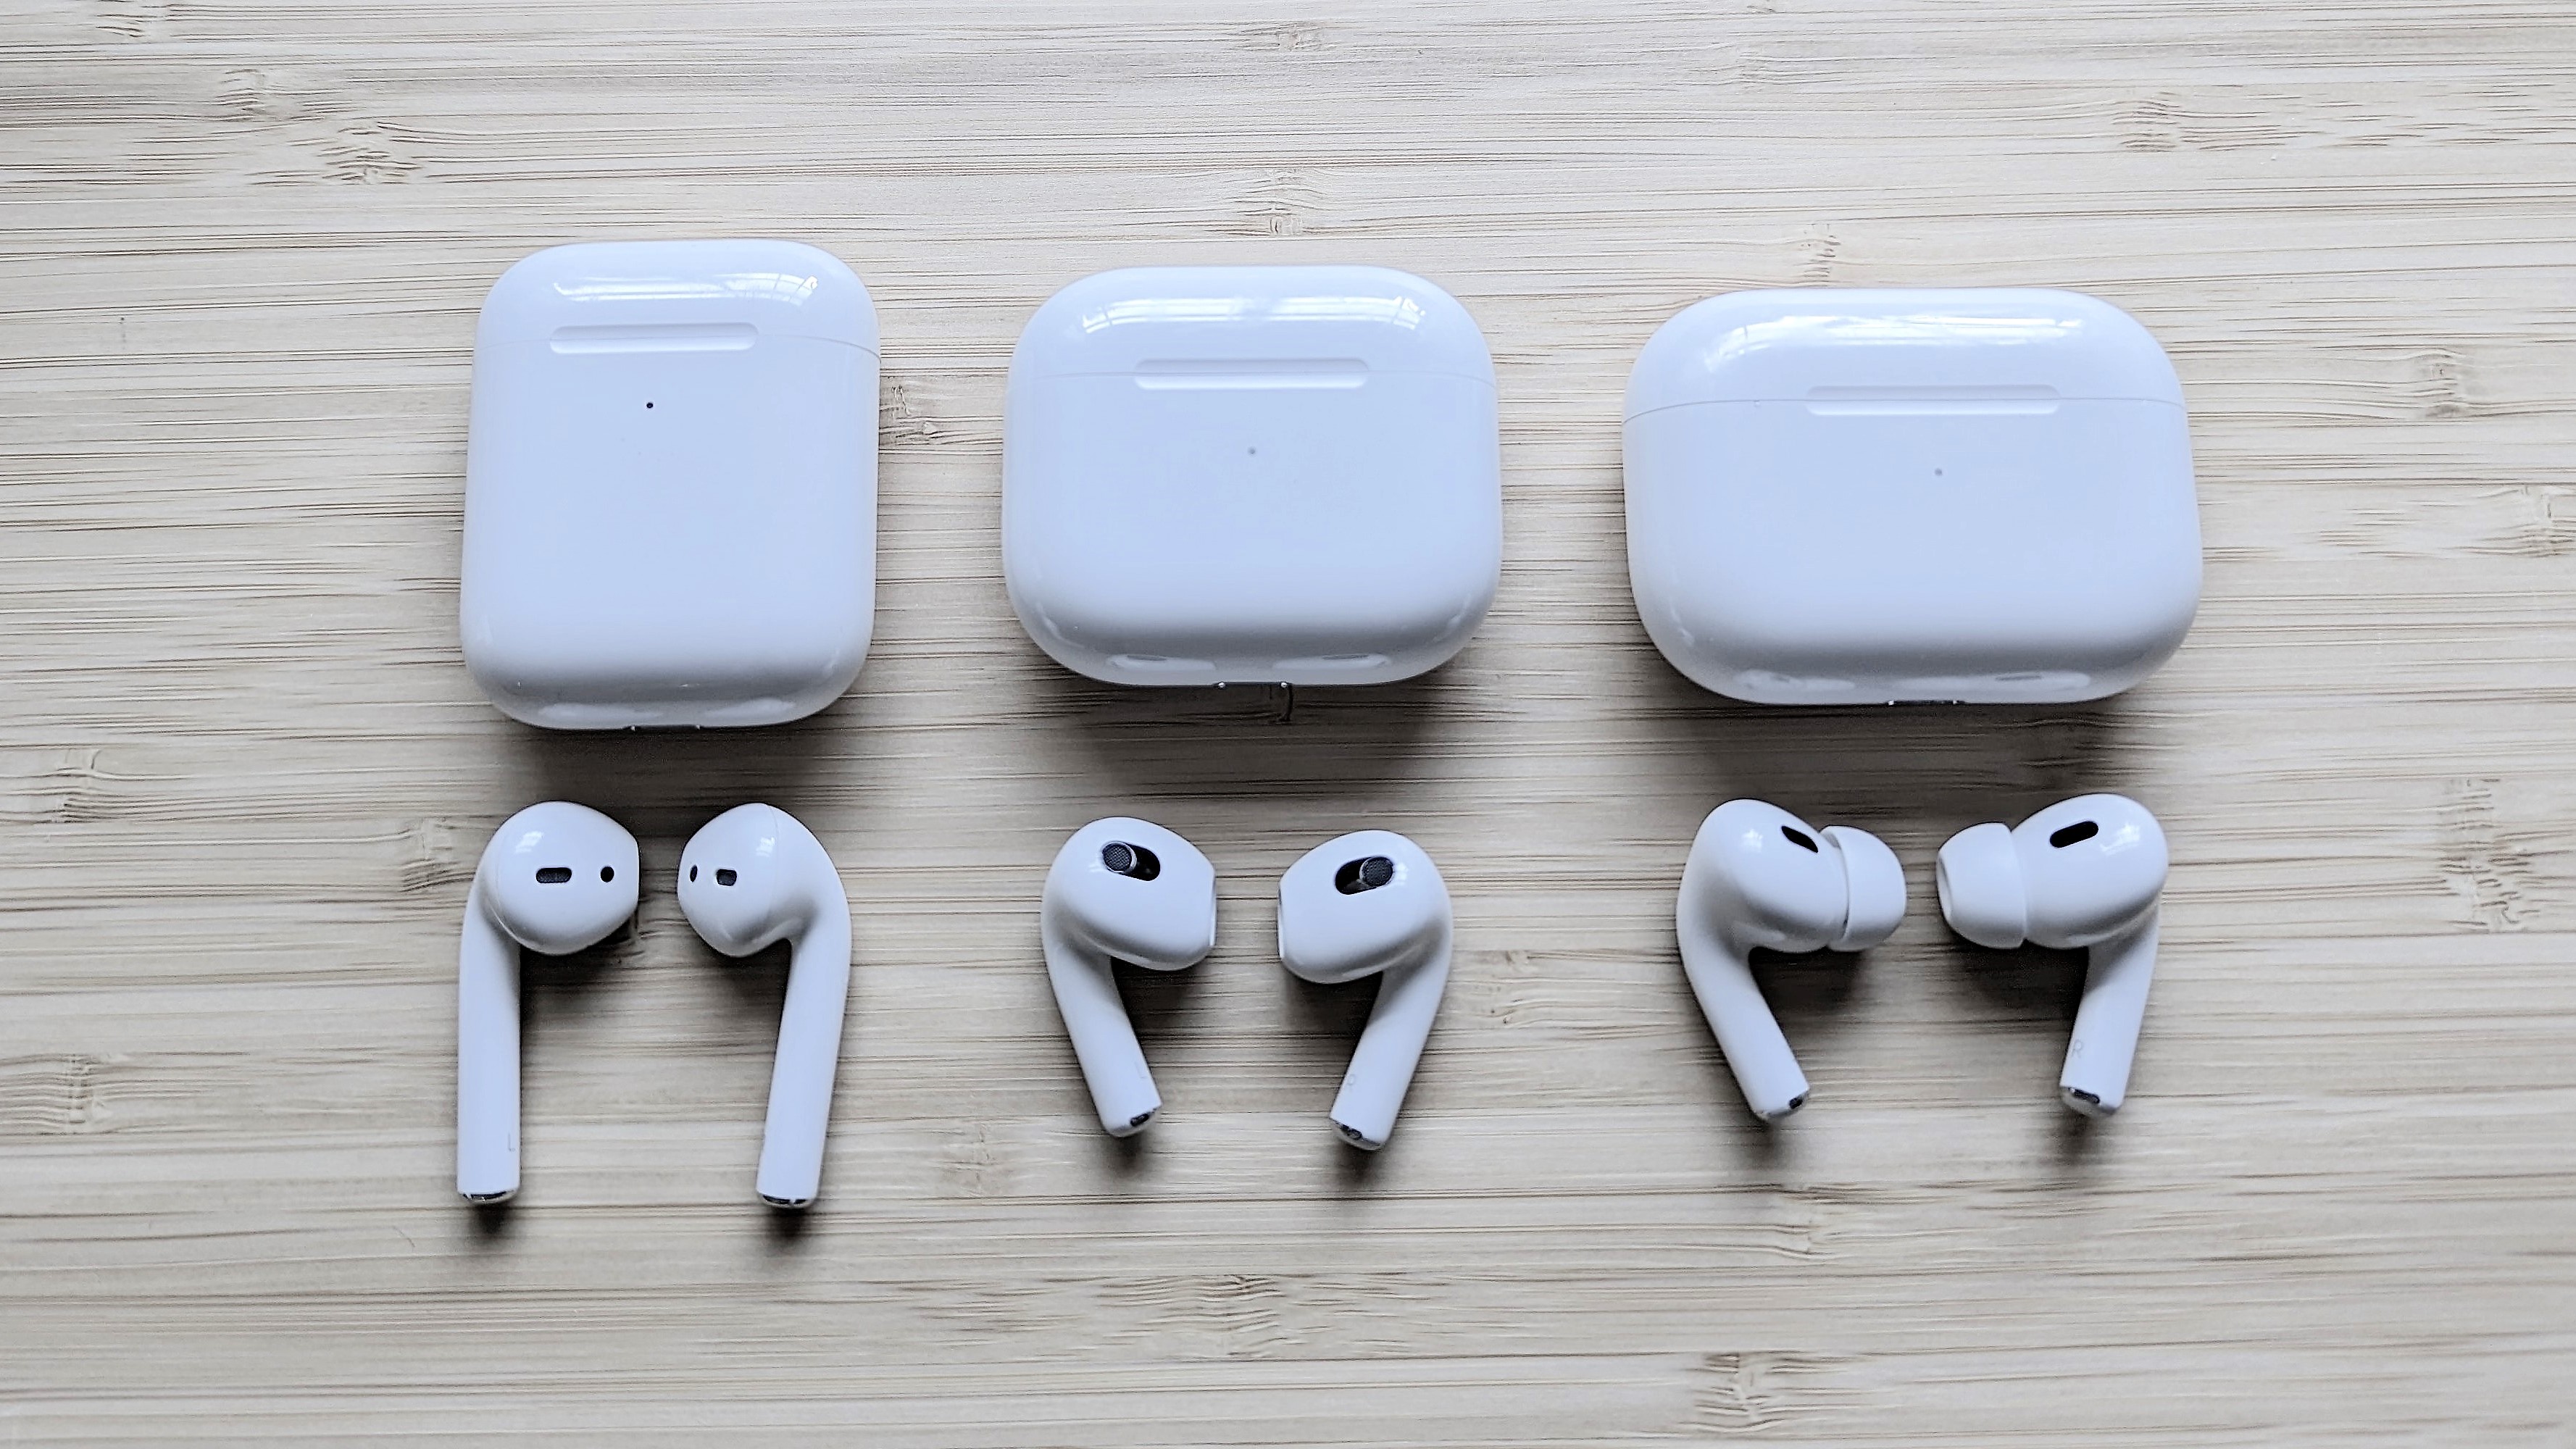 3 AirPods with charging cases lined up on a wooden surface